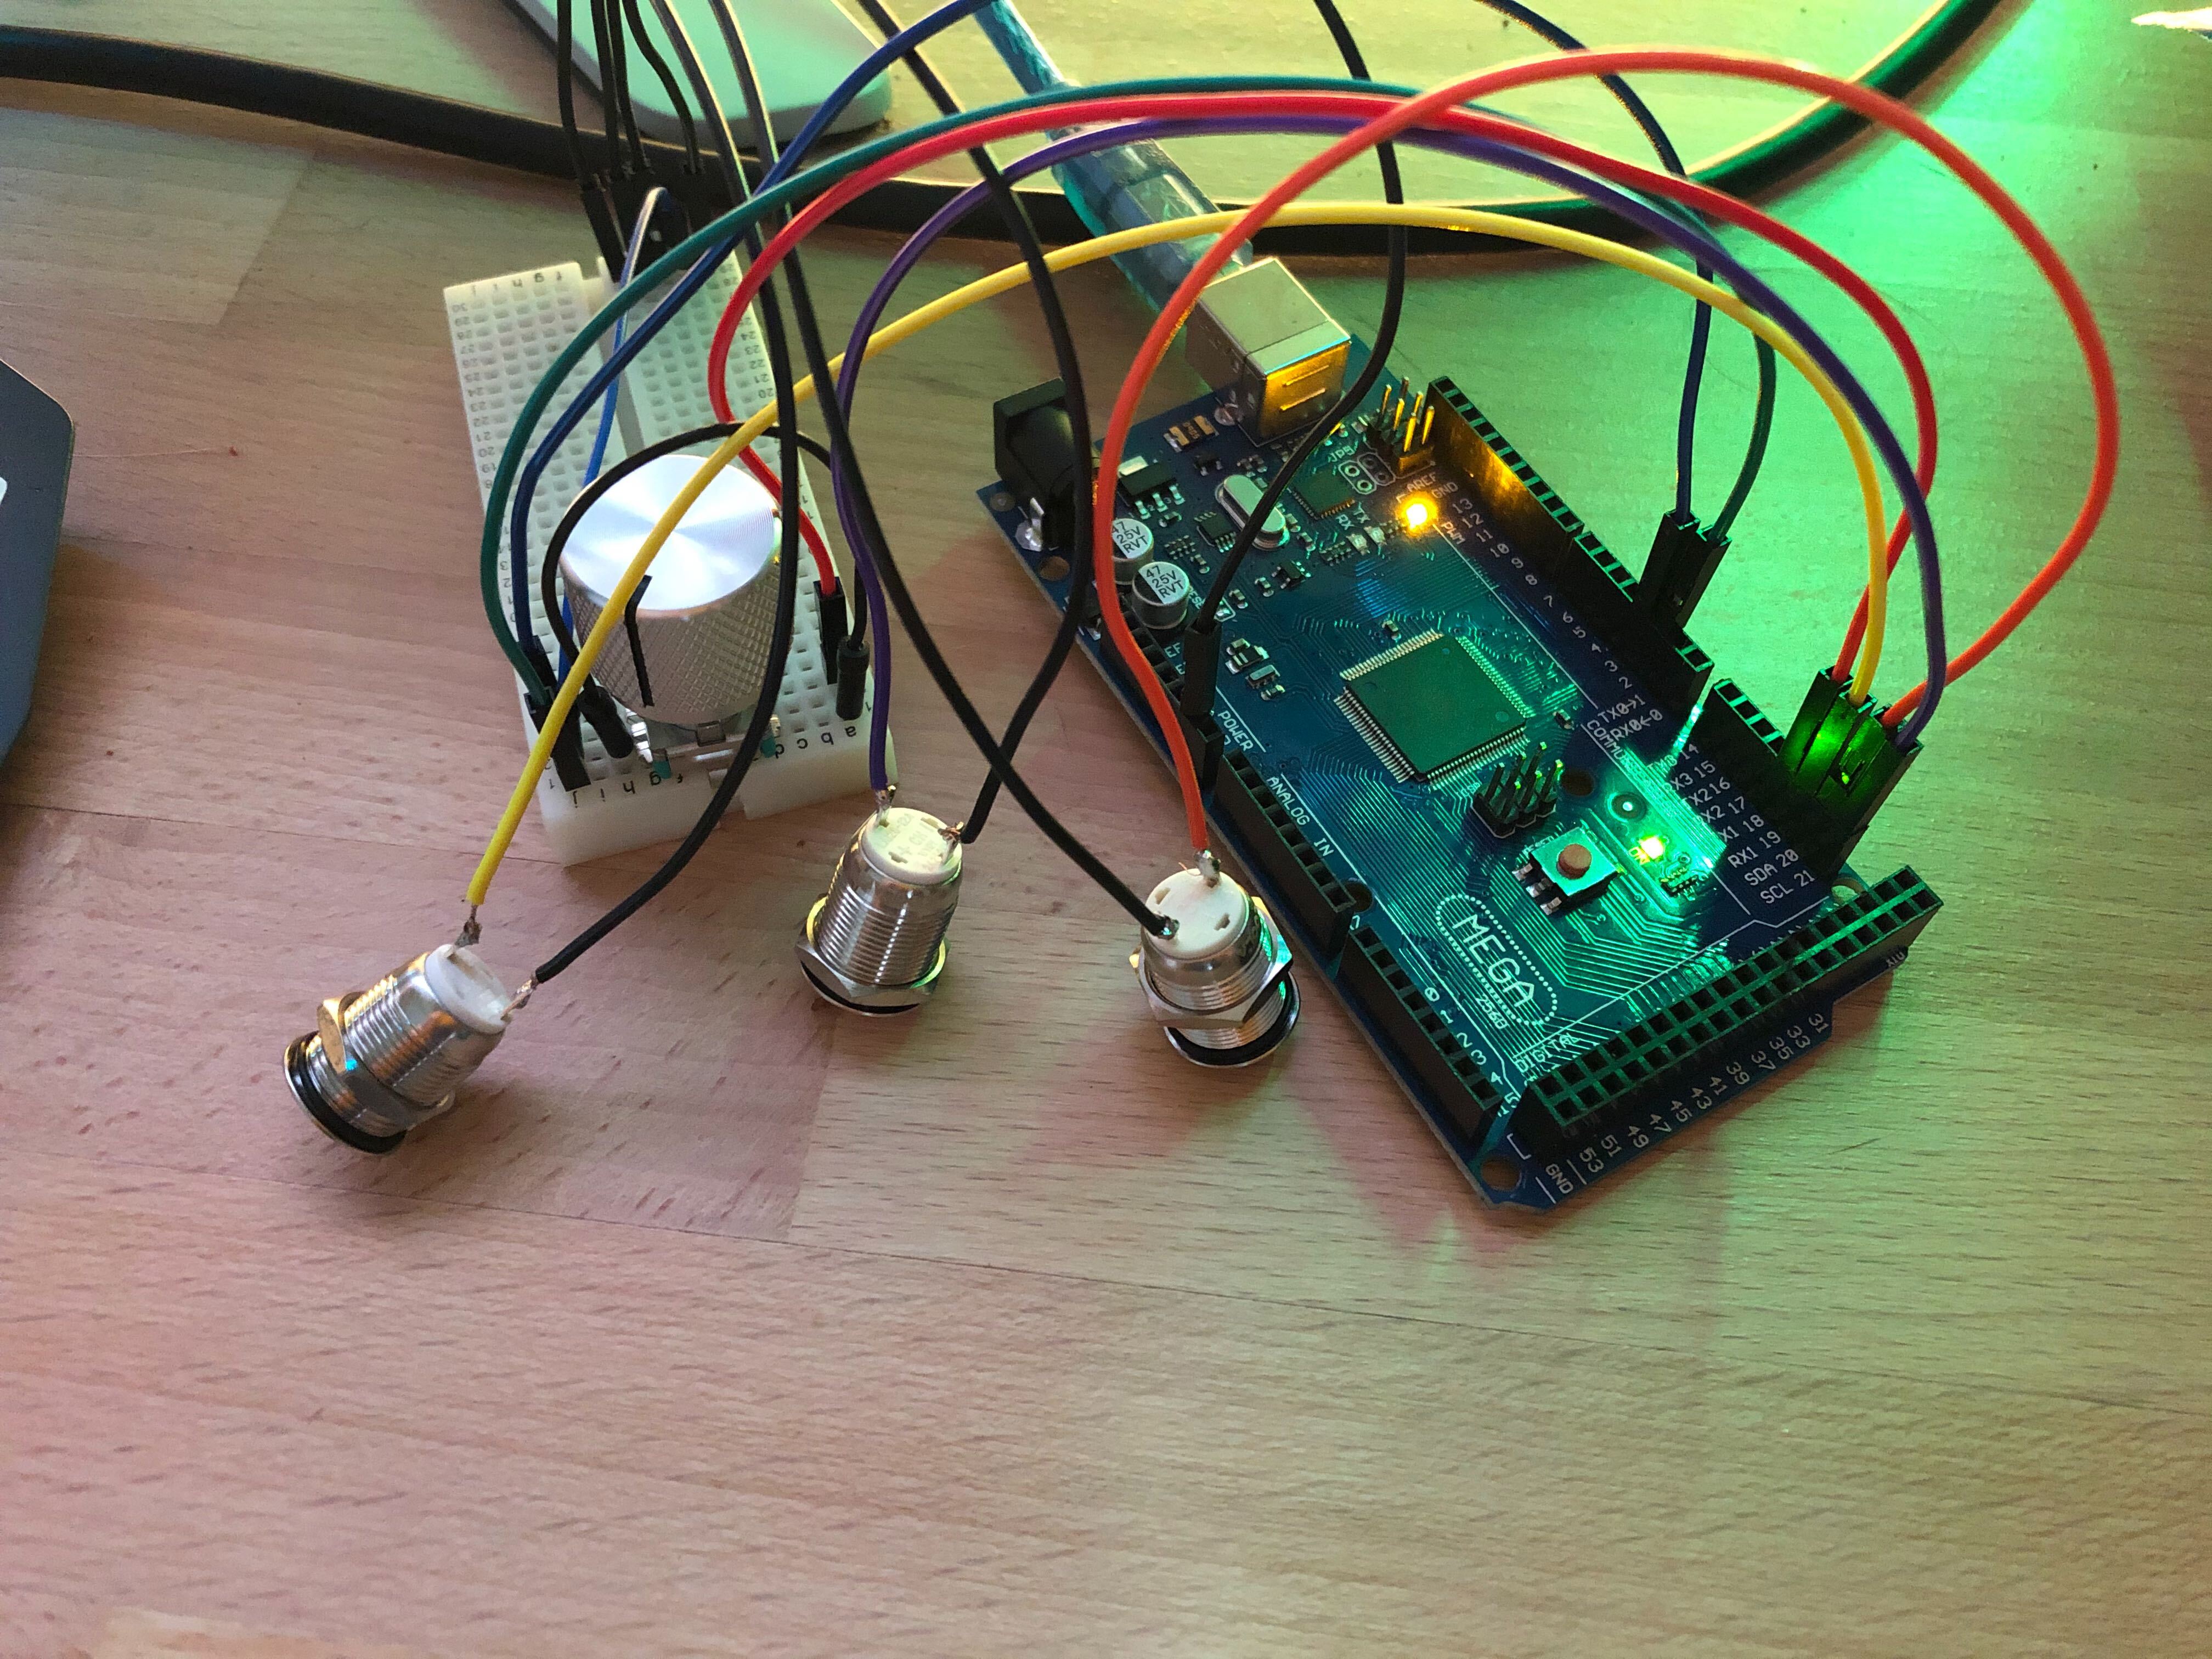 Prototyping on an Arduino mega while awaiting parts